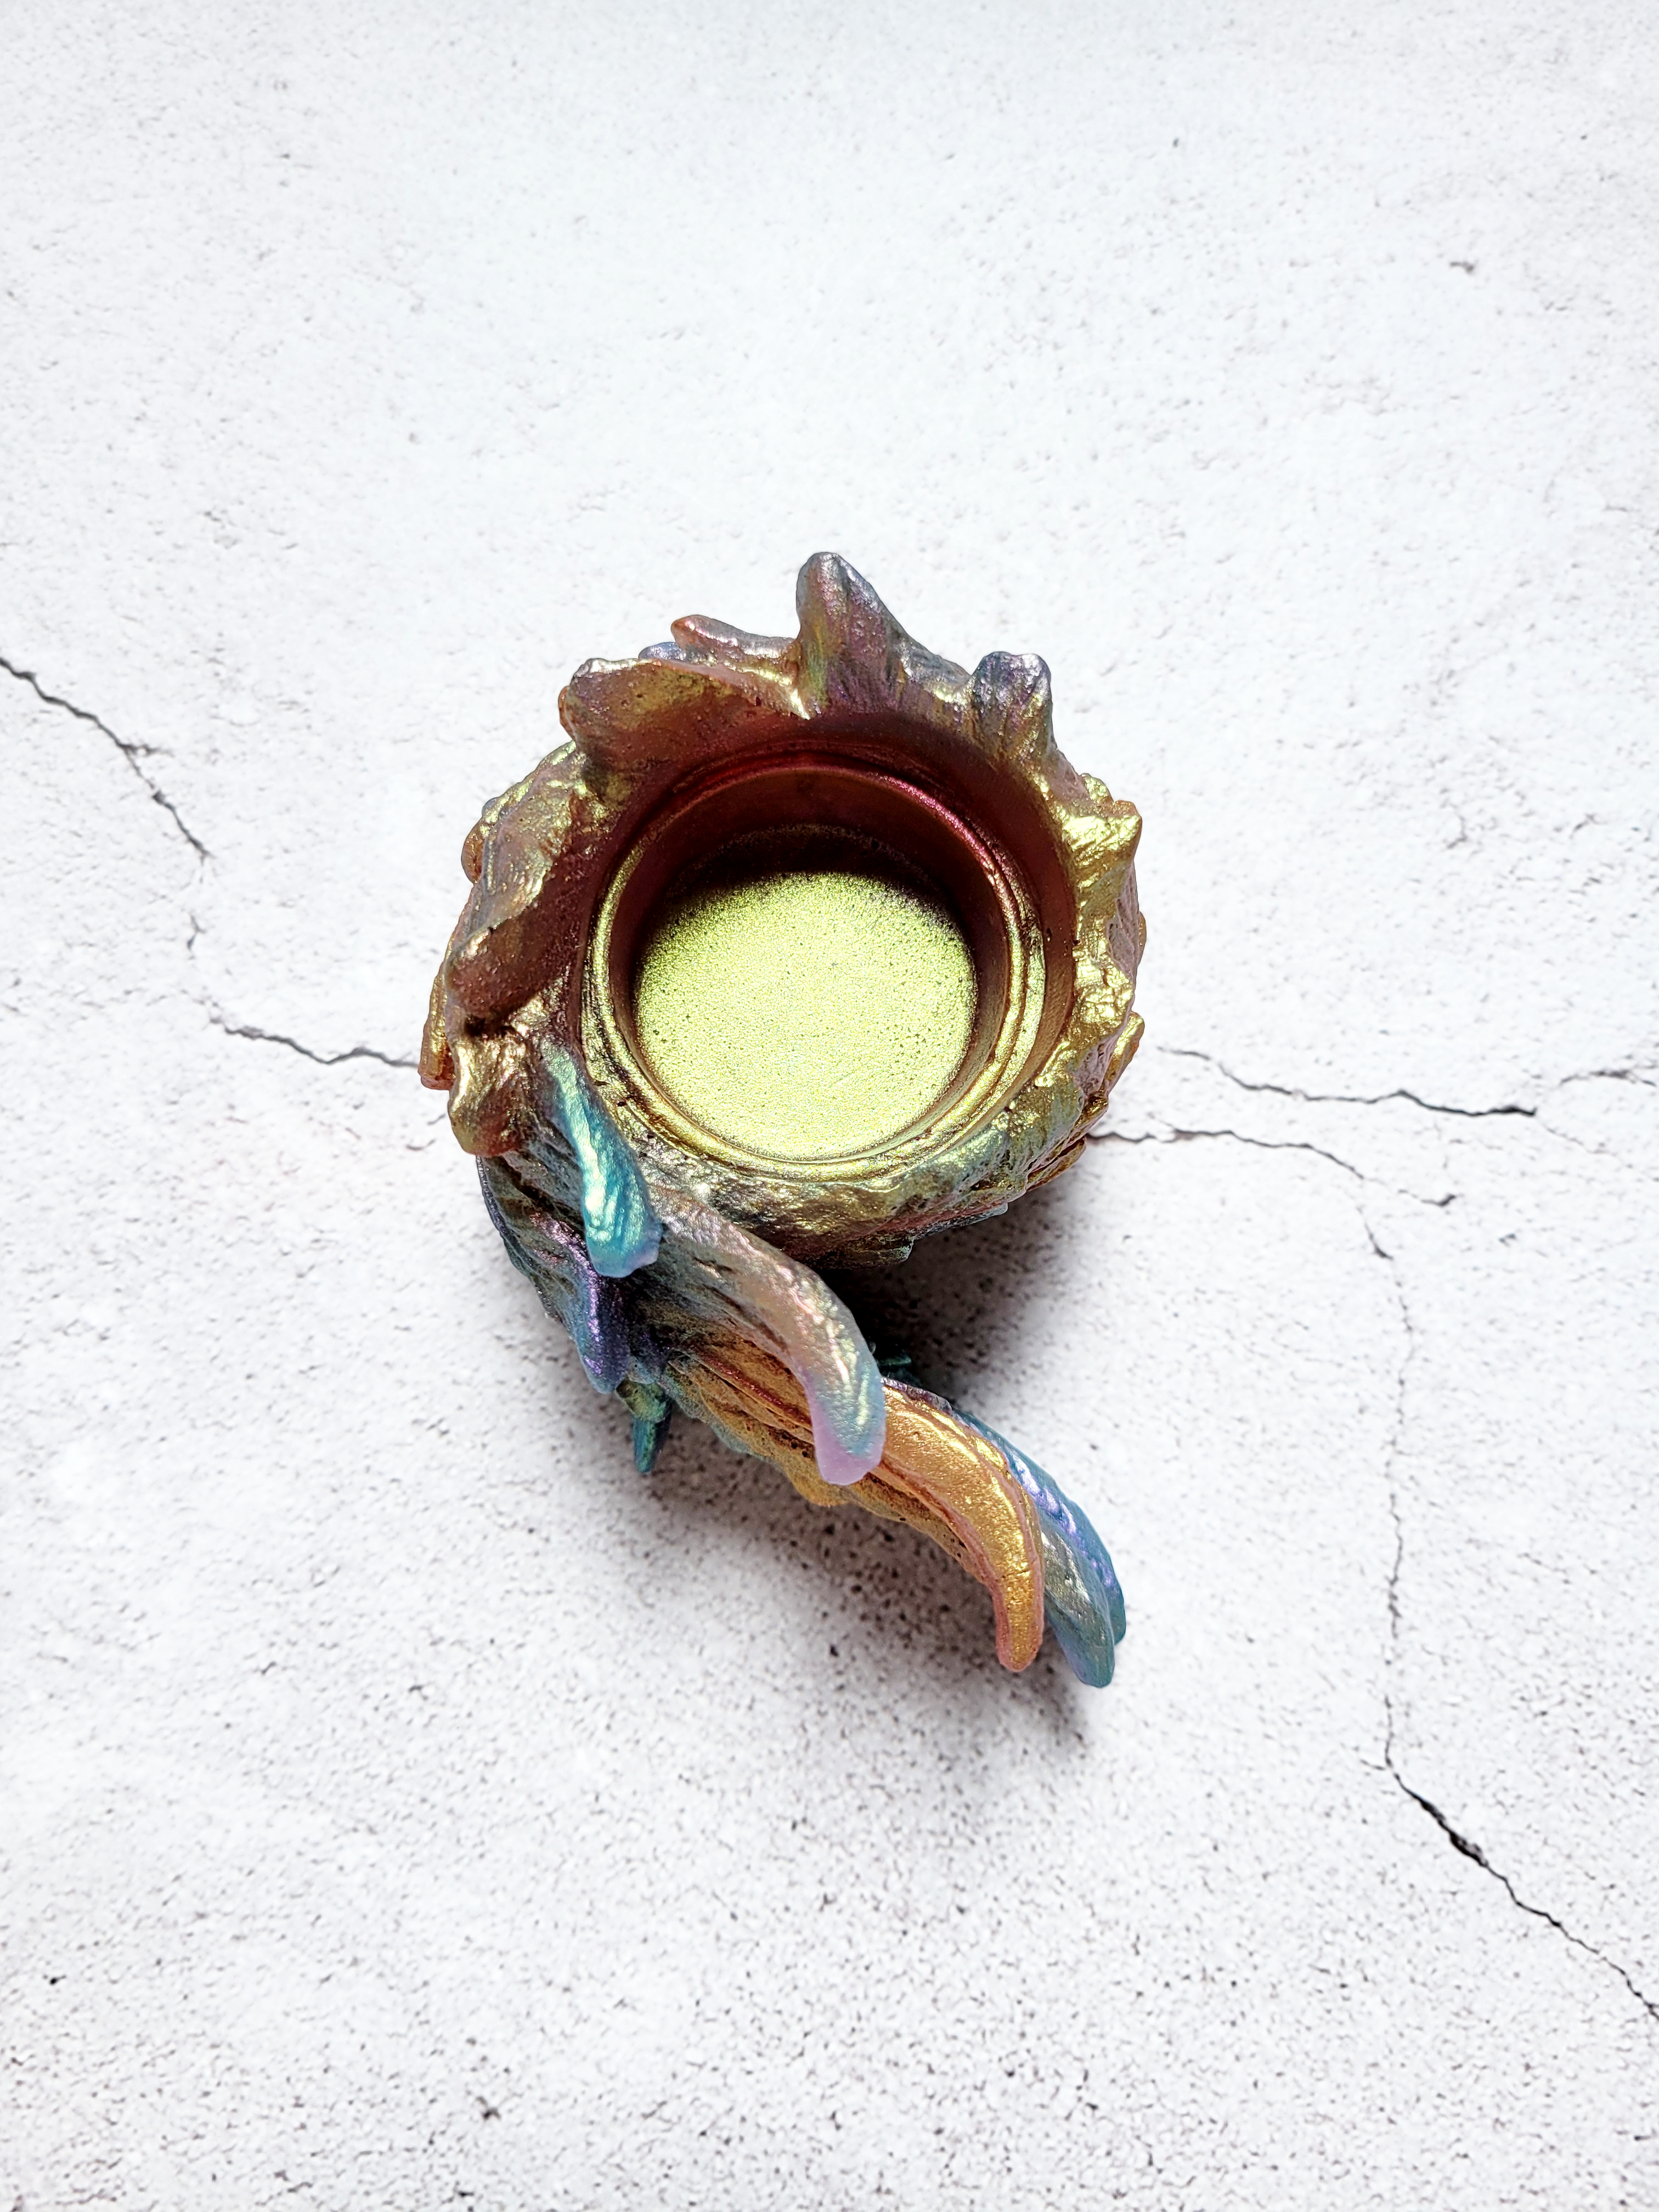 A birds eye view of a tealight candle holder in the style of a bird's wing. It's textured feathers are various colors of blues, oranges, golds, greens.